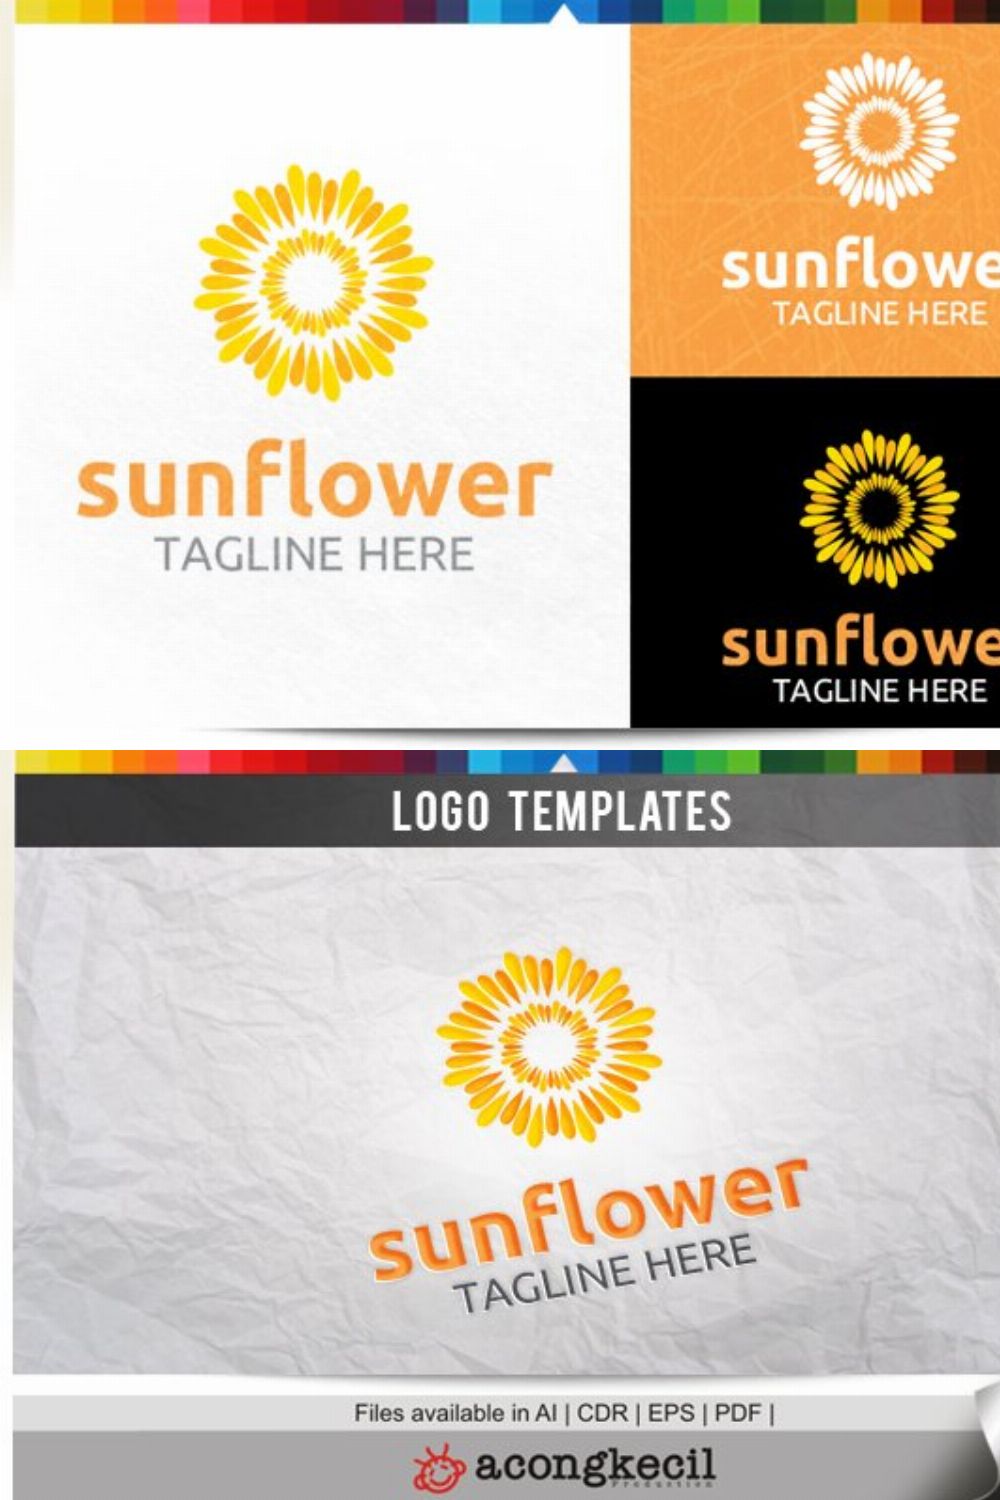 Sunflower pinterest preview image.